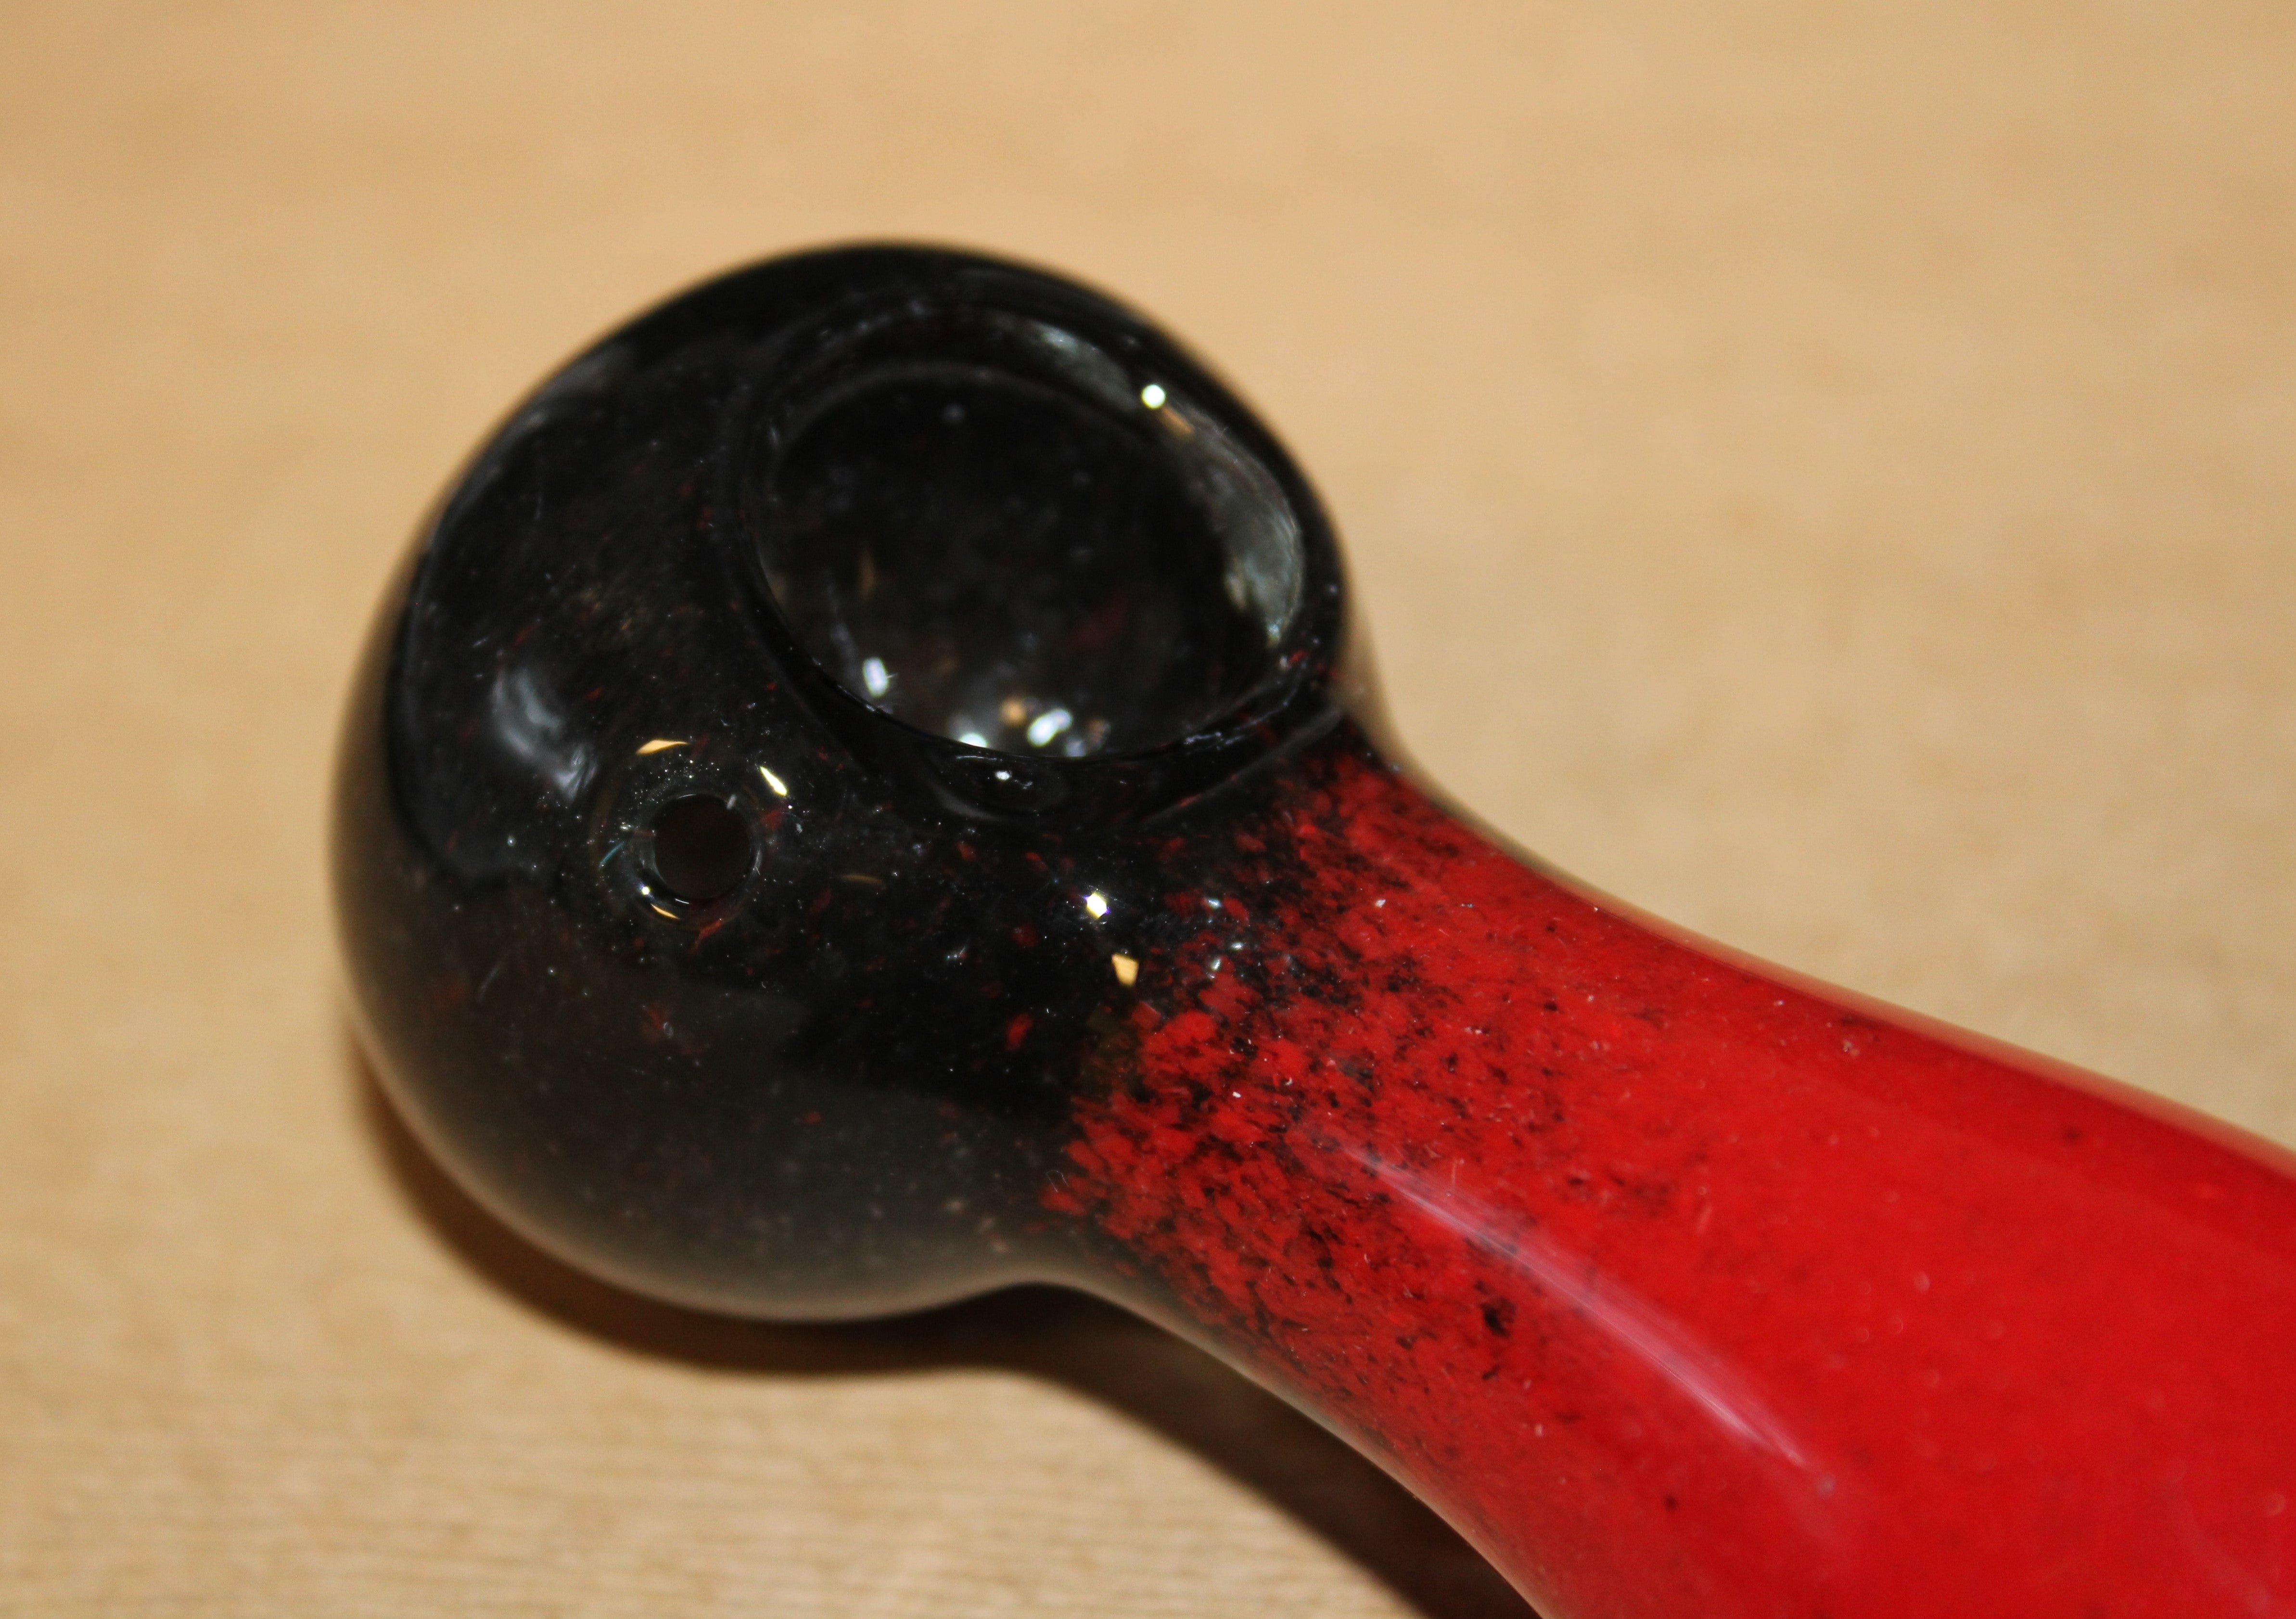 FLAMING EIGHT BALL 4 1/2" Tobacco Smoking Glass Pipe TORPEDO GLASS pipes